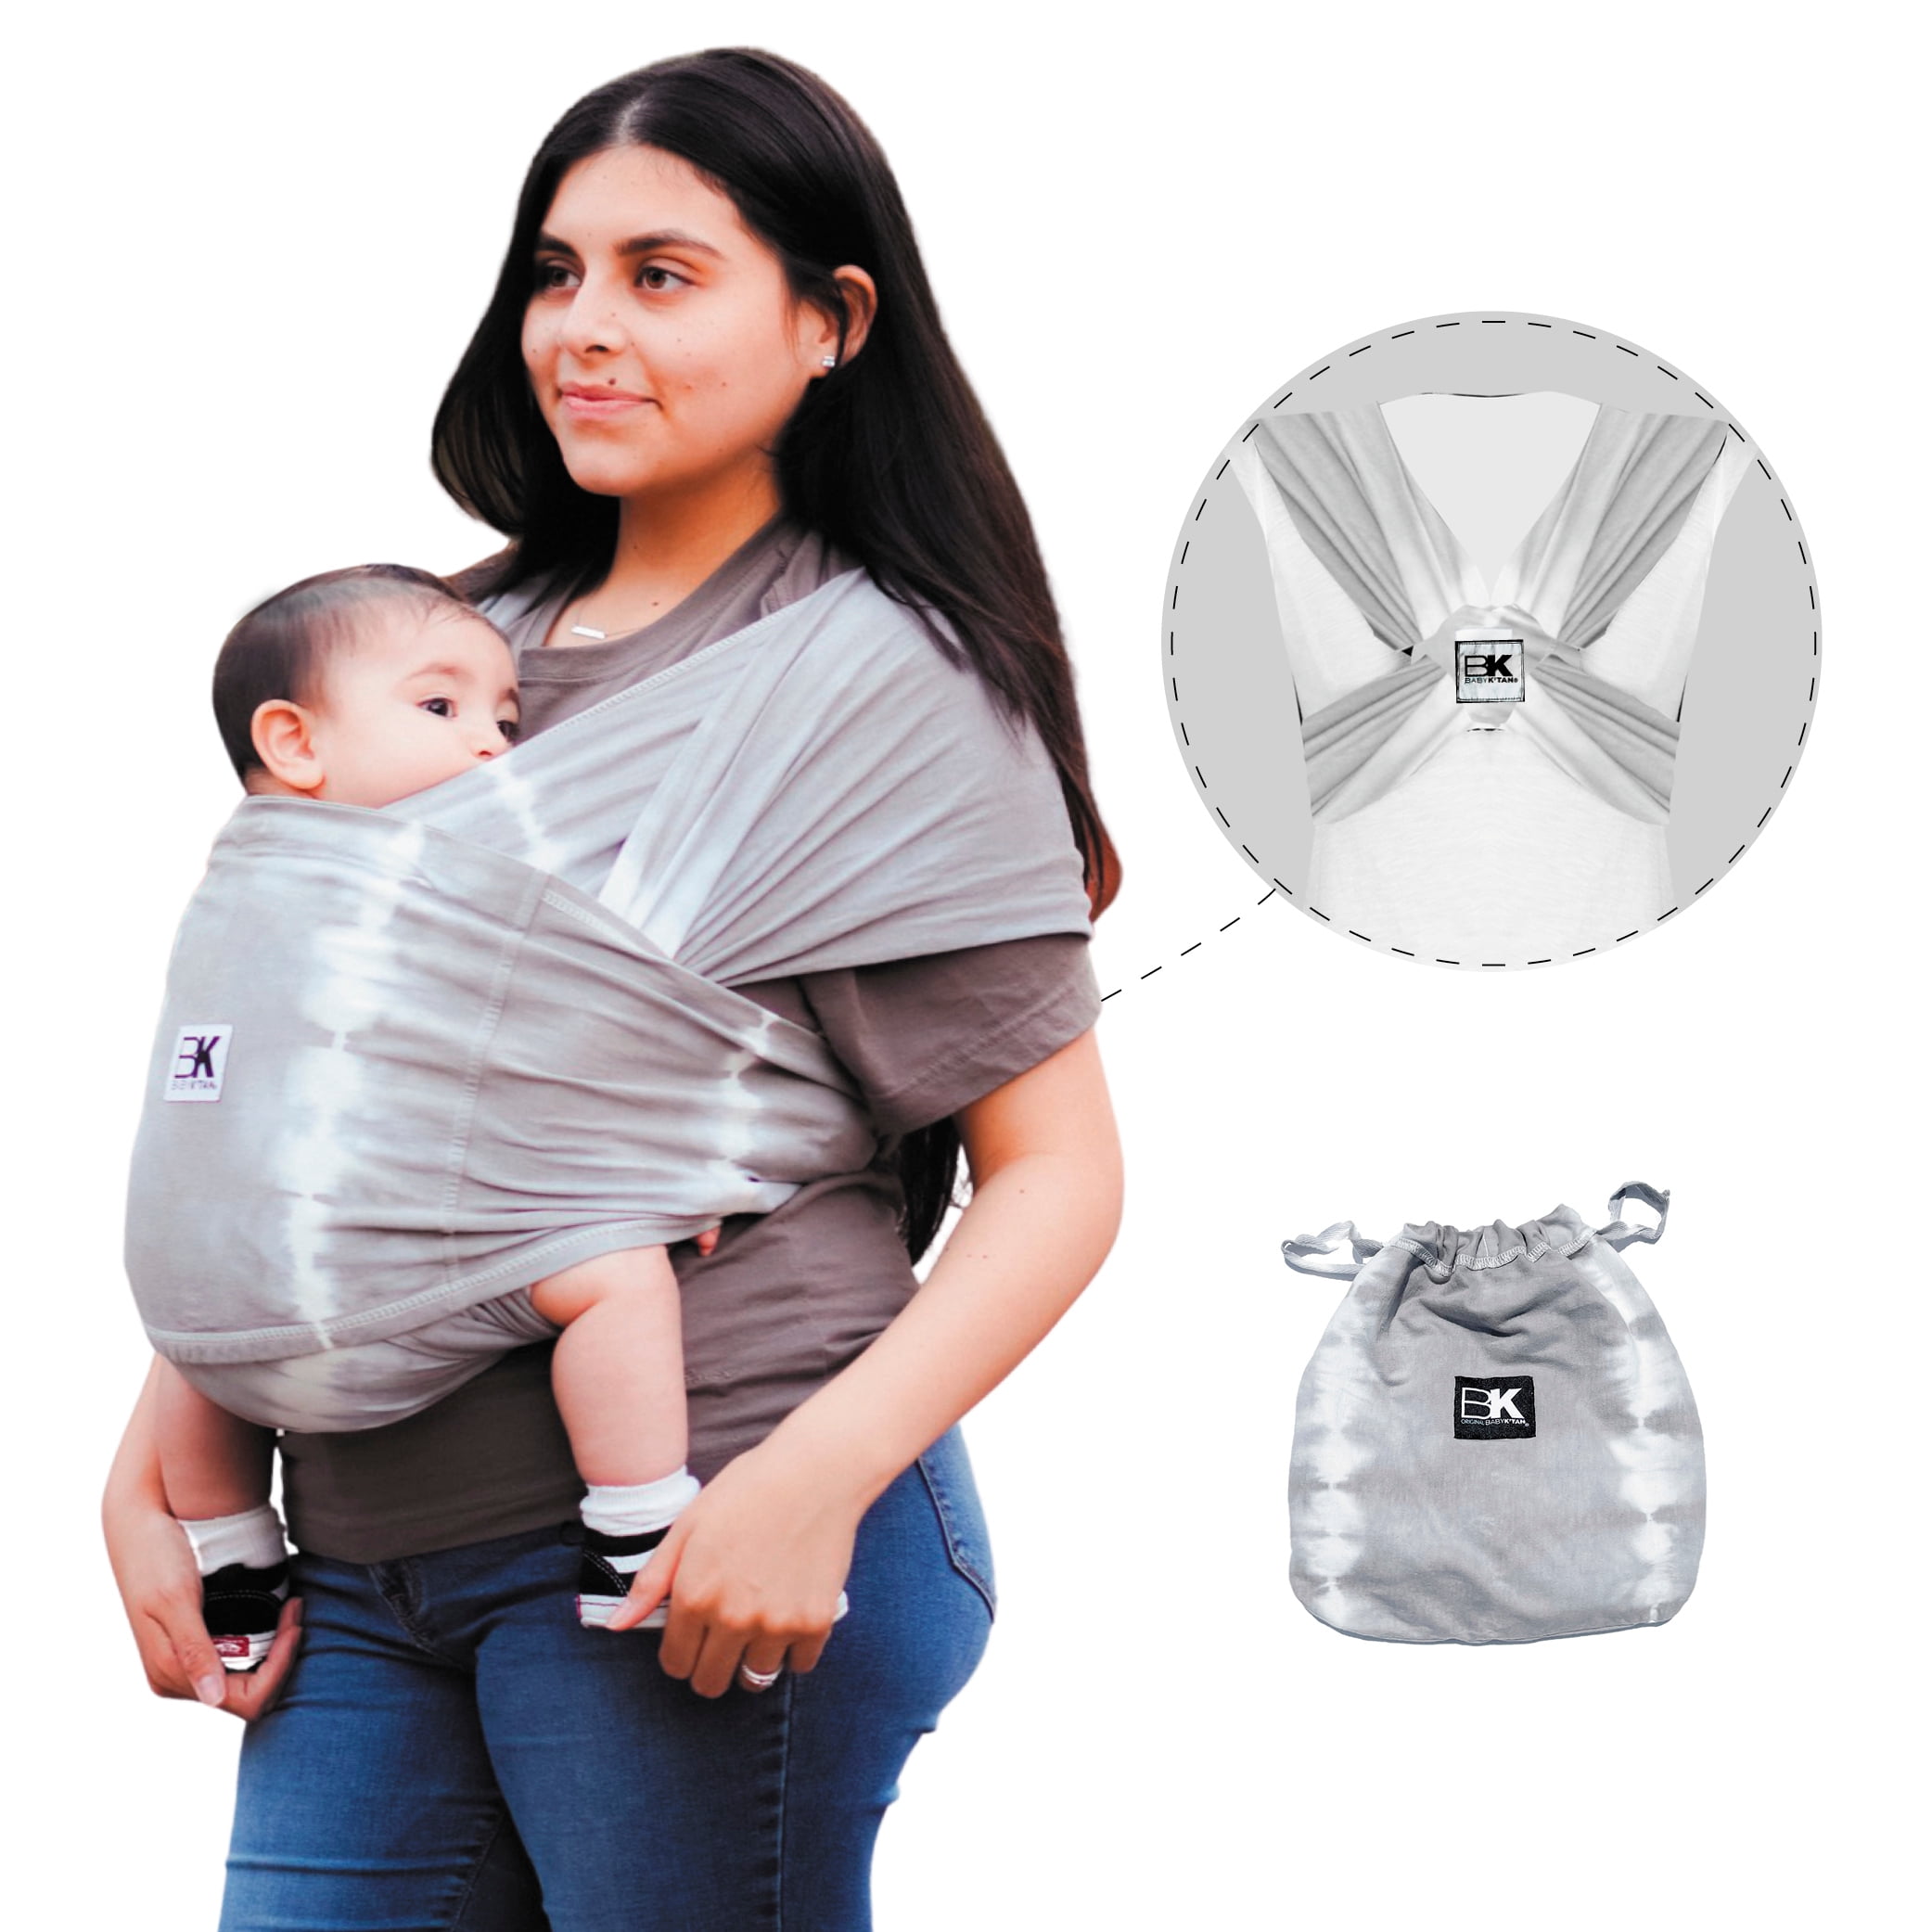 Infant and Child Sling Simple PreWrapped Holder for Babywearing XS Baby K’tan Print Baby Wrap Carrier Carry Newborn up to 35 lbs Plaid Grey W Dress 2-4 / M Jacket up to 36 No Tying or Rings